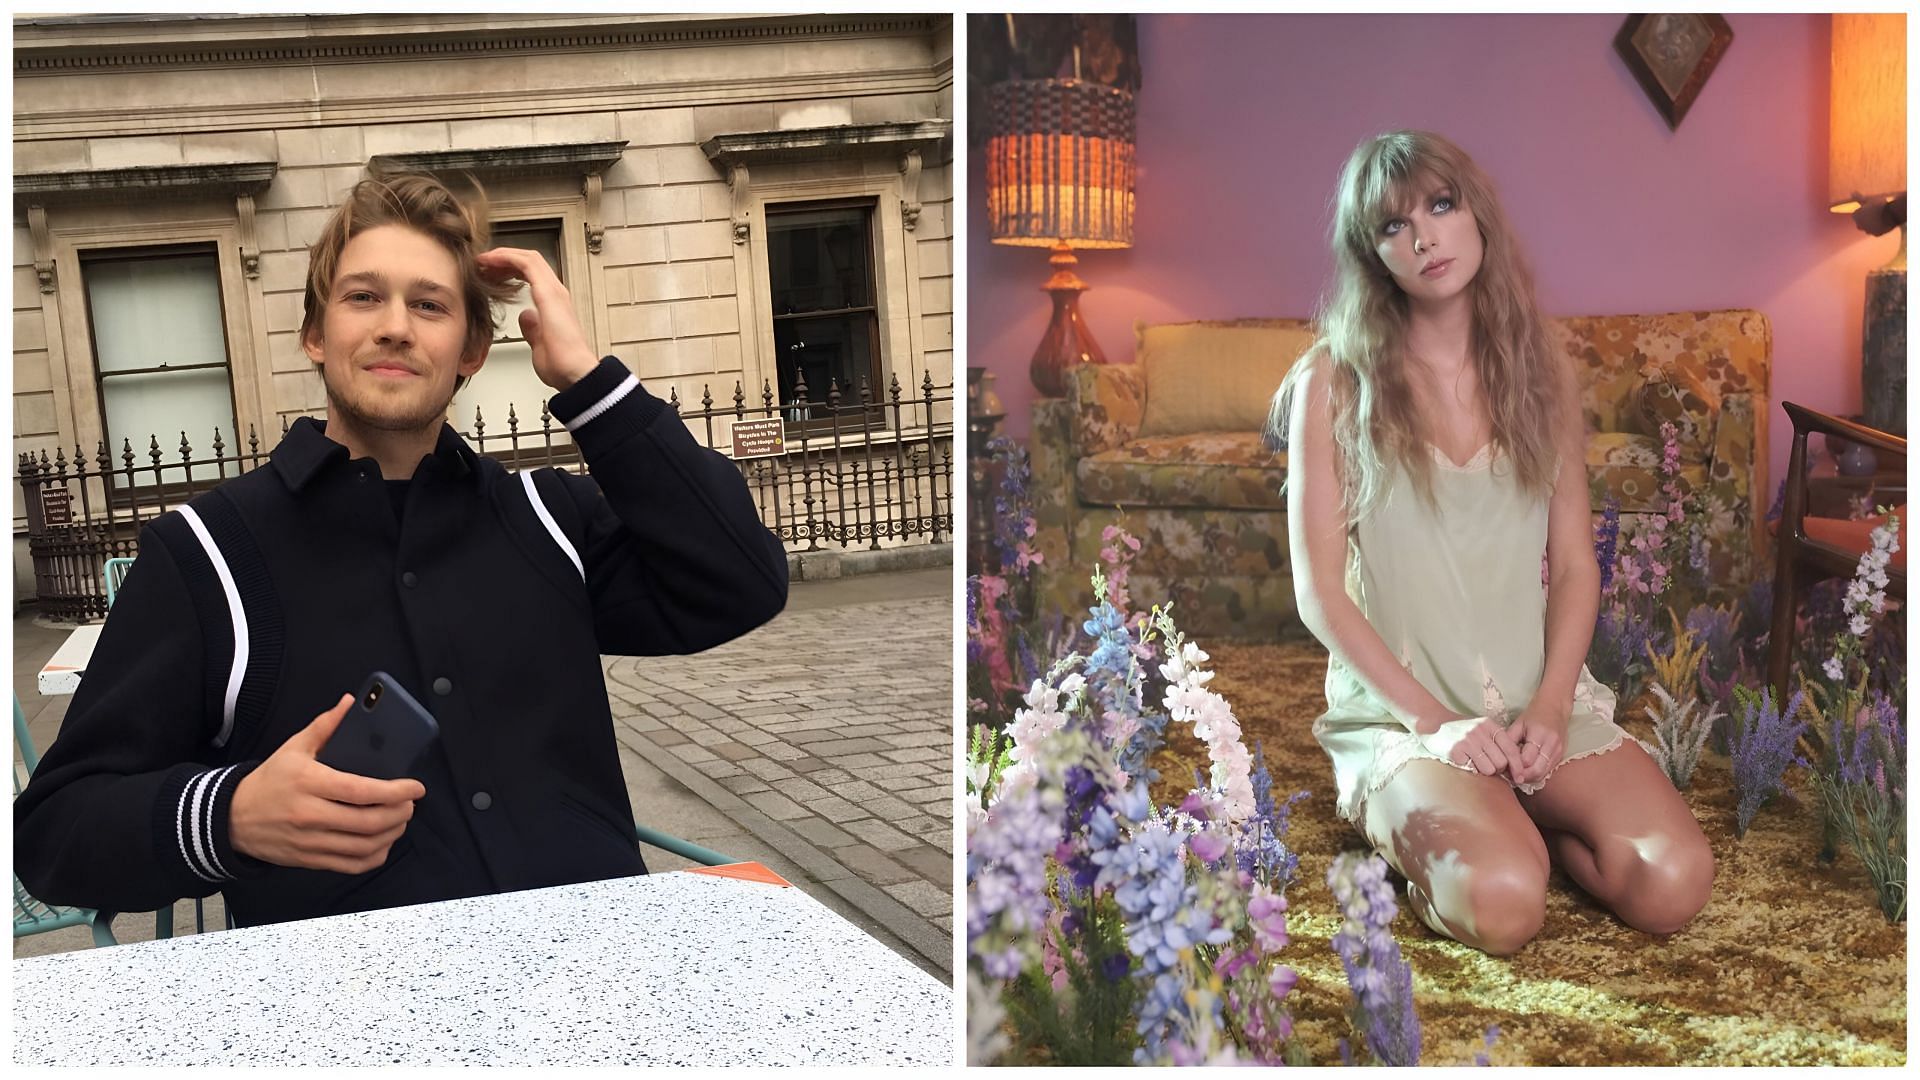 Joe Alwyn and Taylor Swift (Images via official Instagram @joe.alwyn and @taylorswift